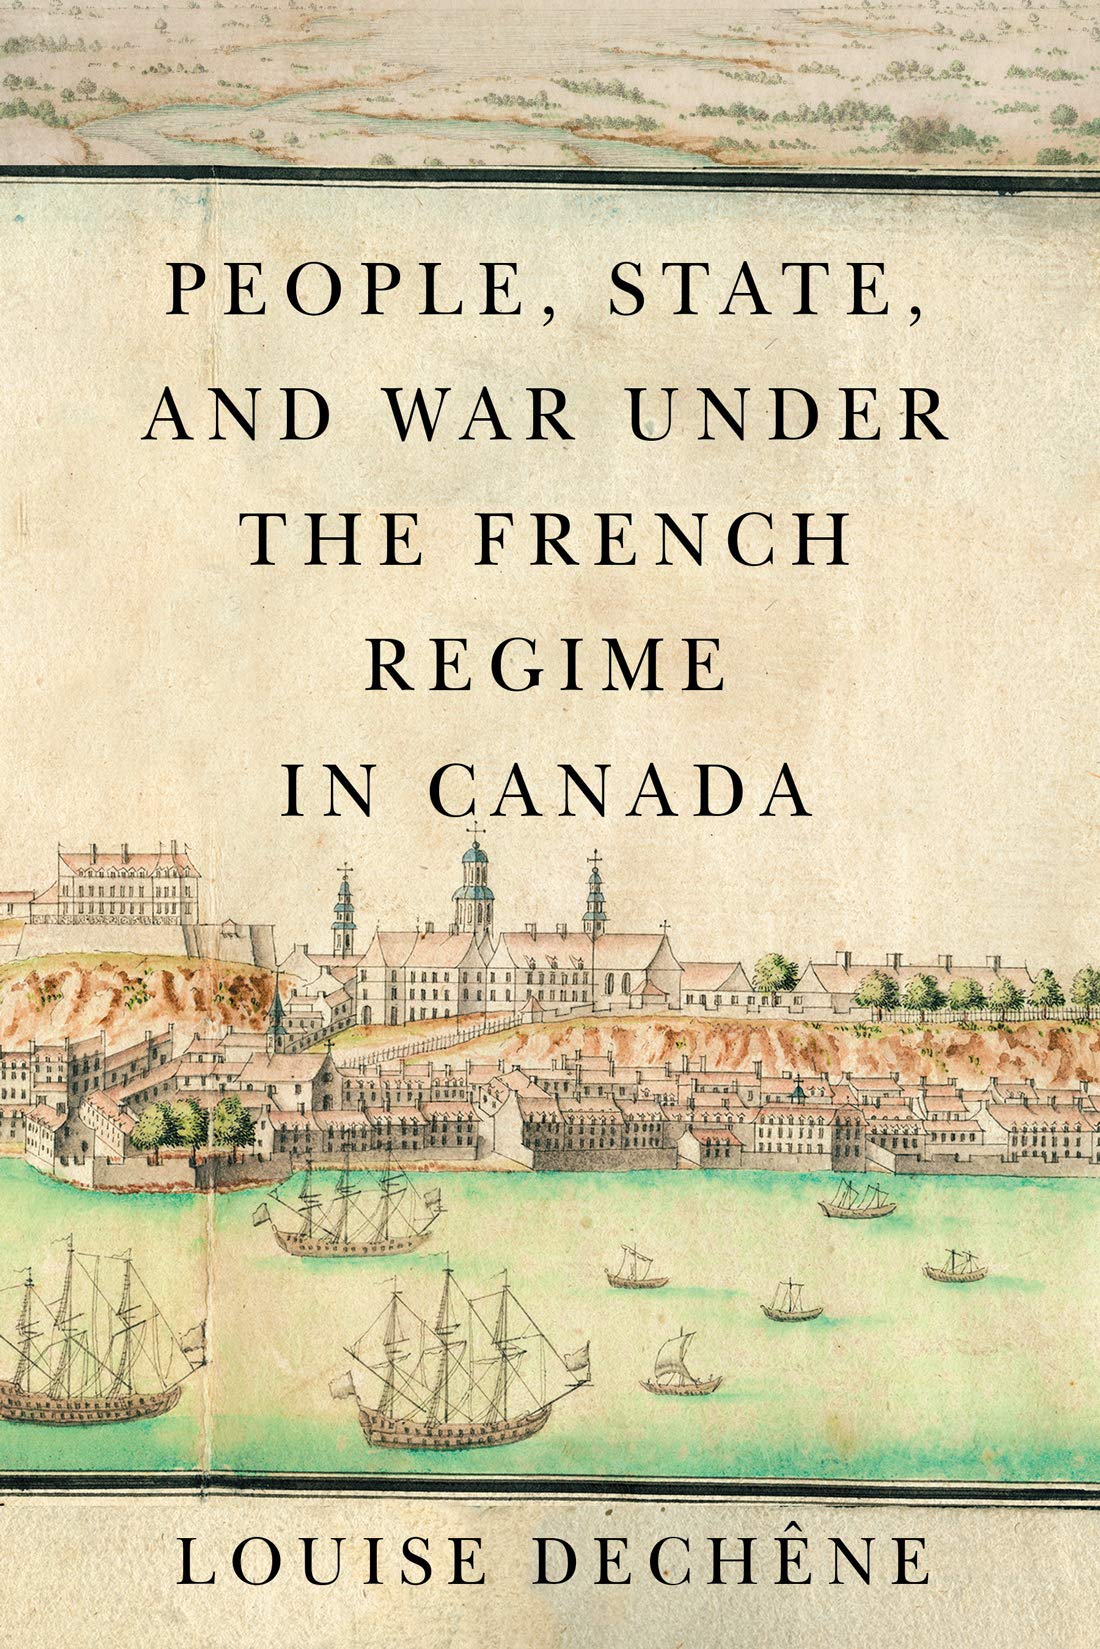 People, State, and War under the French Regime in Canada (McGill-Queen’s French Atlantic Worlds Series) - Louise Dechêne